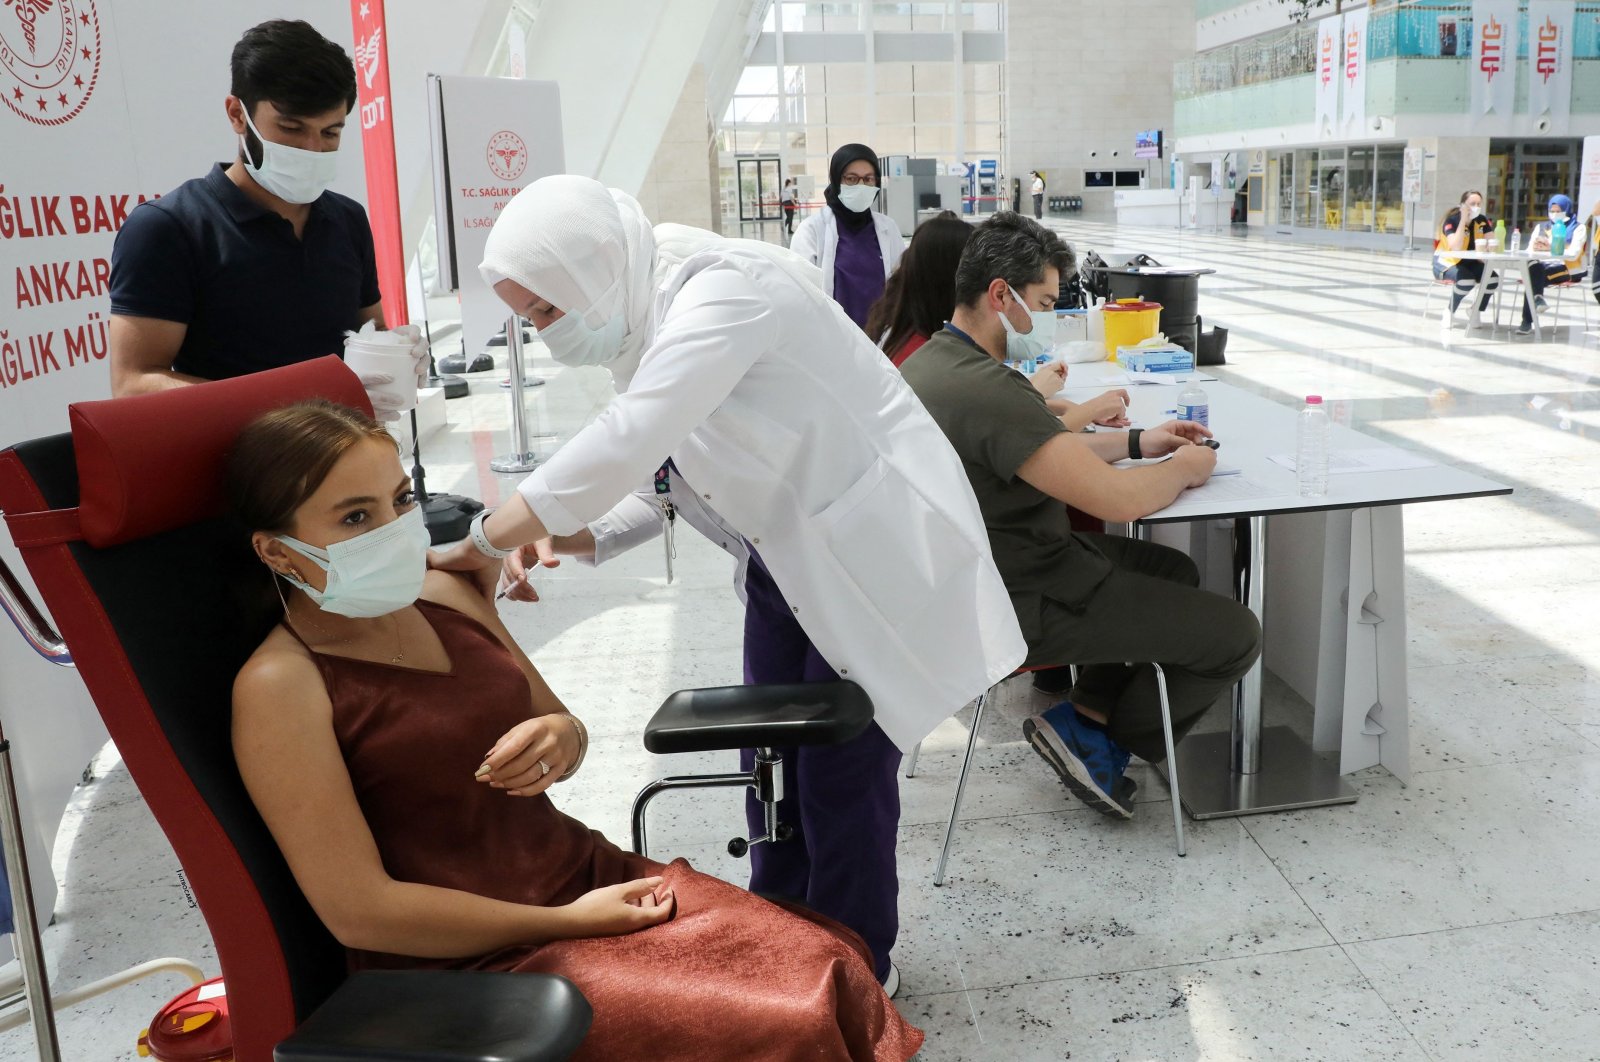 A woman receives a dose of a COVID-19 vaccine at a vaccination center set up at the Ankara High-Speed Train Station in Ankara, Turkey, June 28, 2021. (AFP Photo)